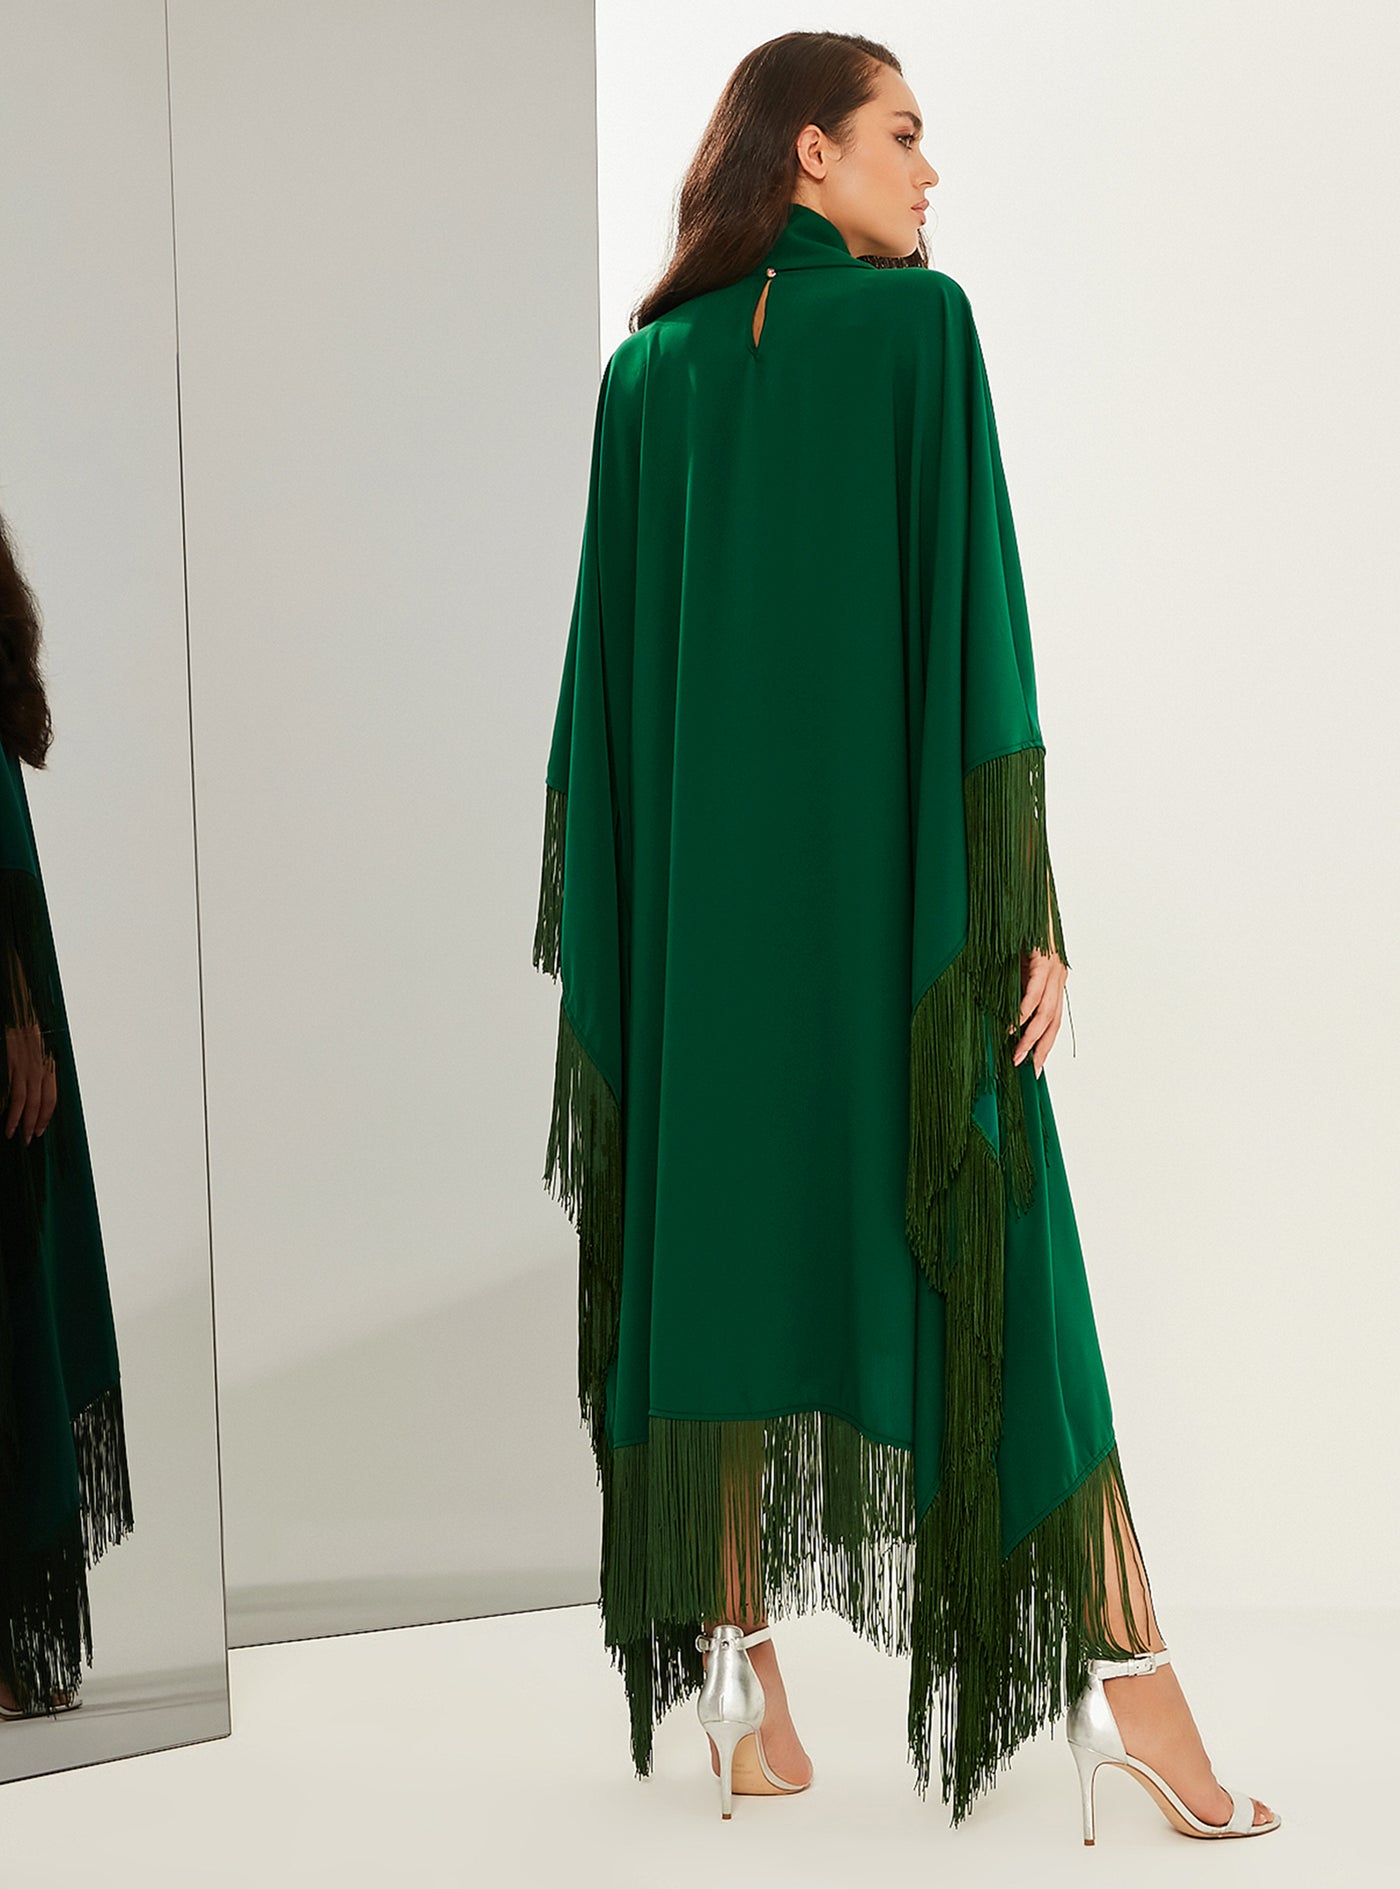 Emerald Green Fringed Kaftan Dress With Tie Neck Detailed